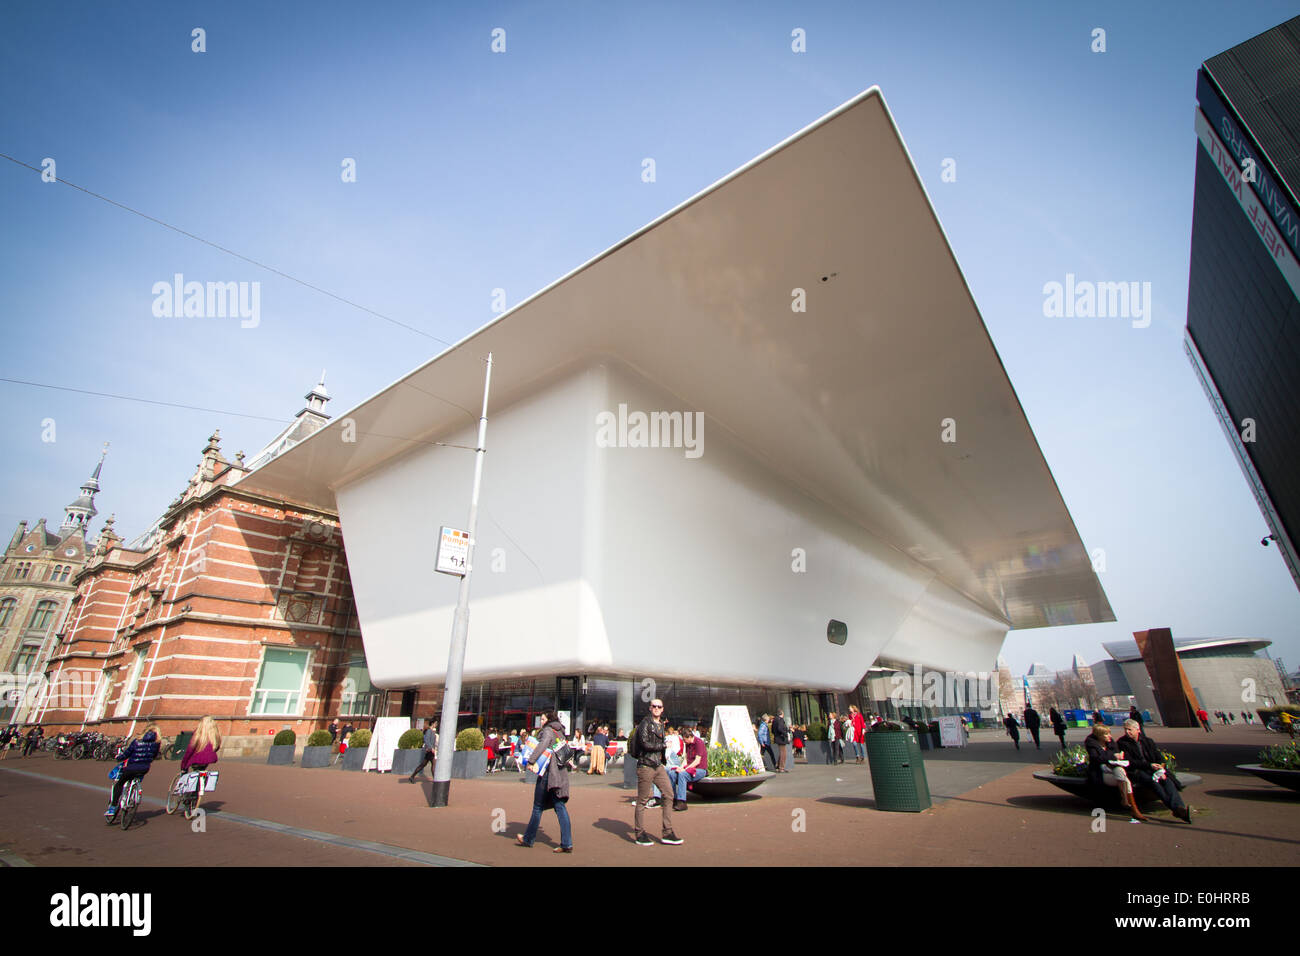 The 2014 extension to the stedelijk museum amsterdam Stock Photo